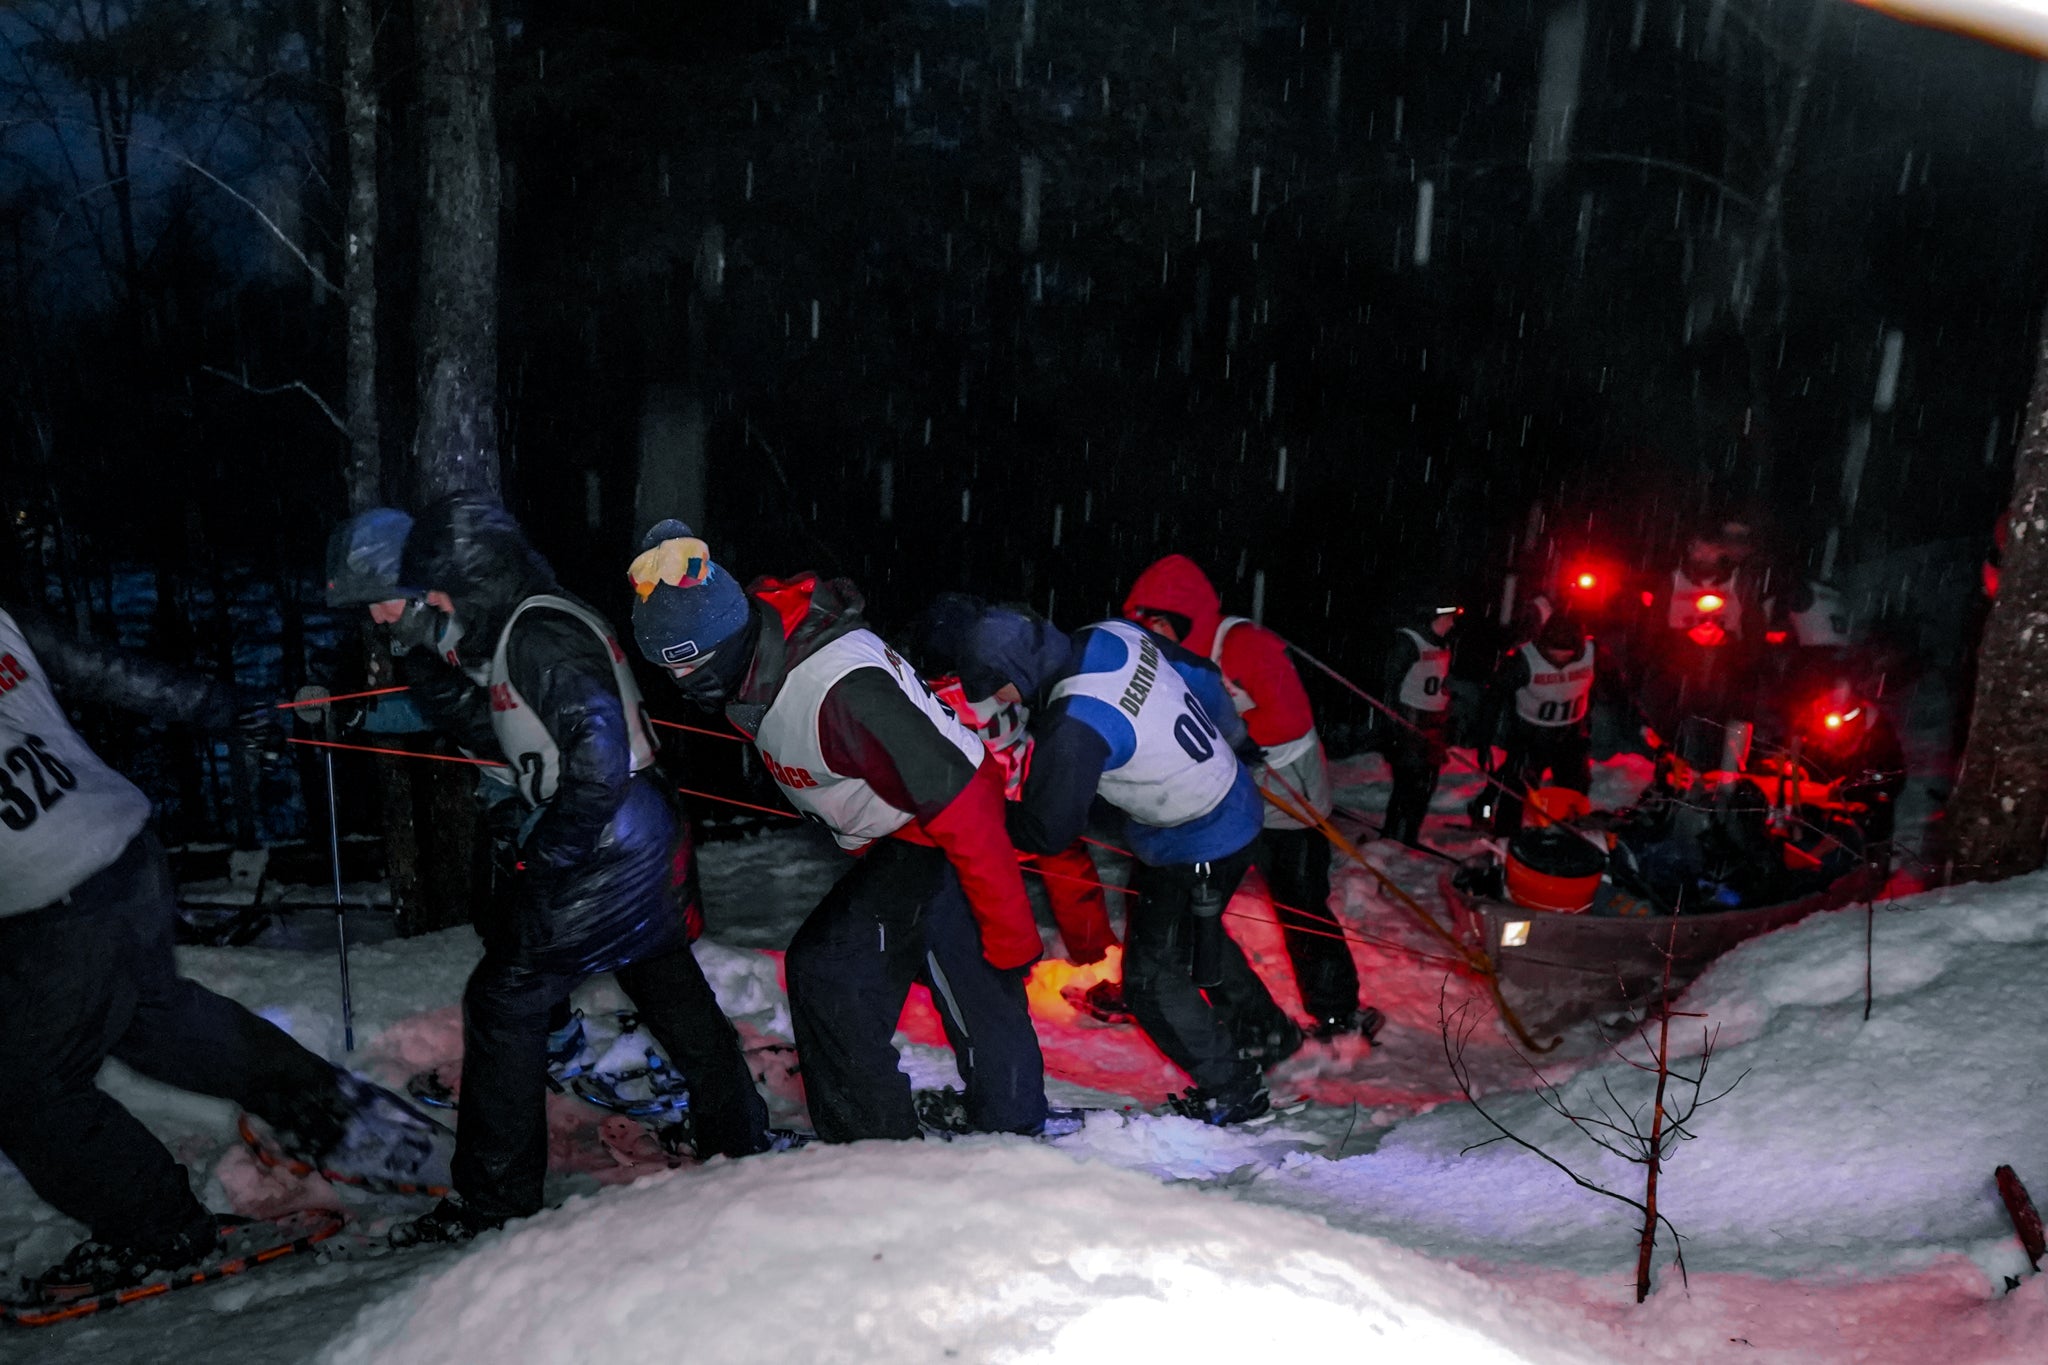 spartan winter death racers pulling cargo up a mountain in the dark and snow